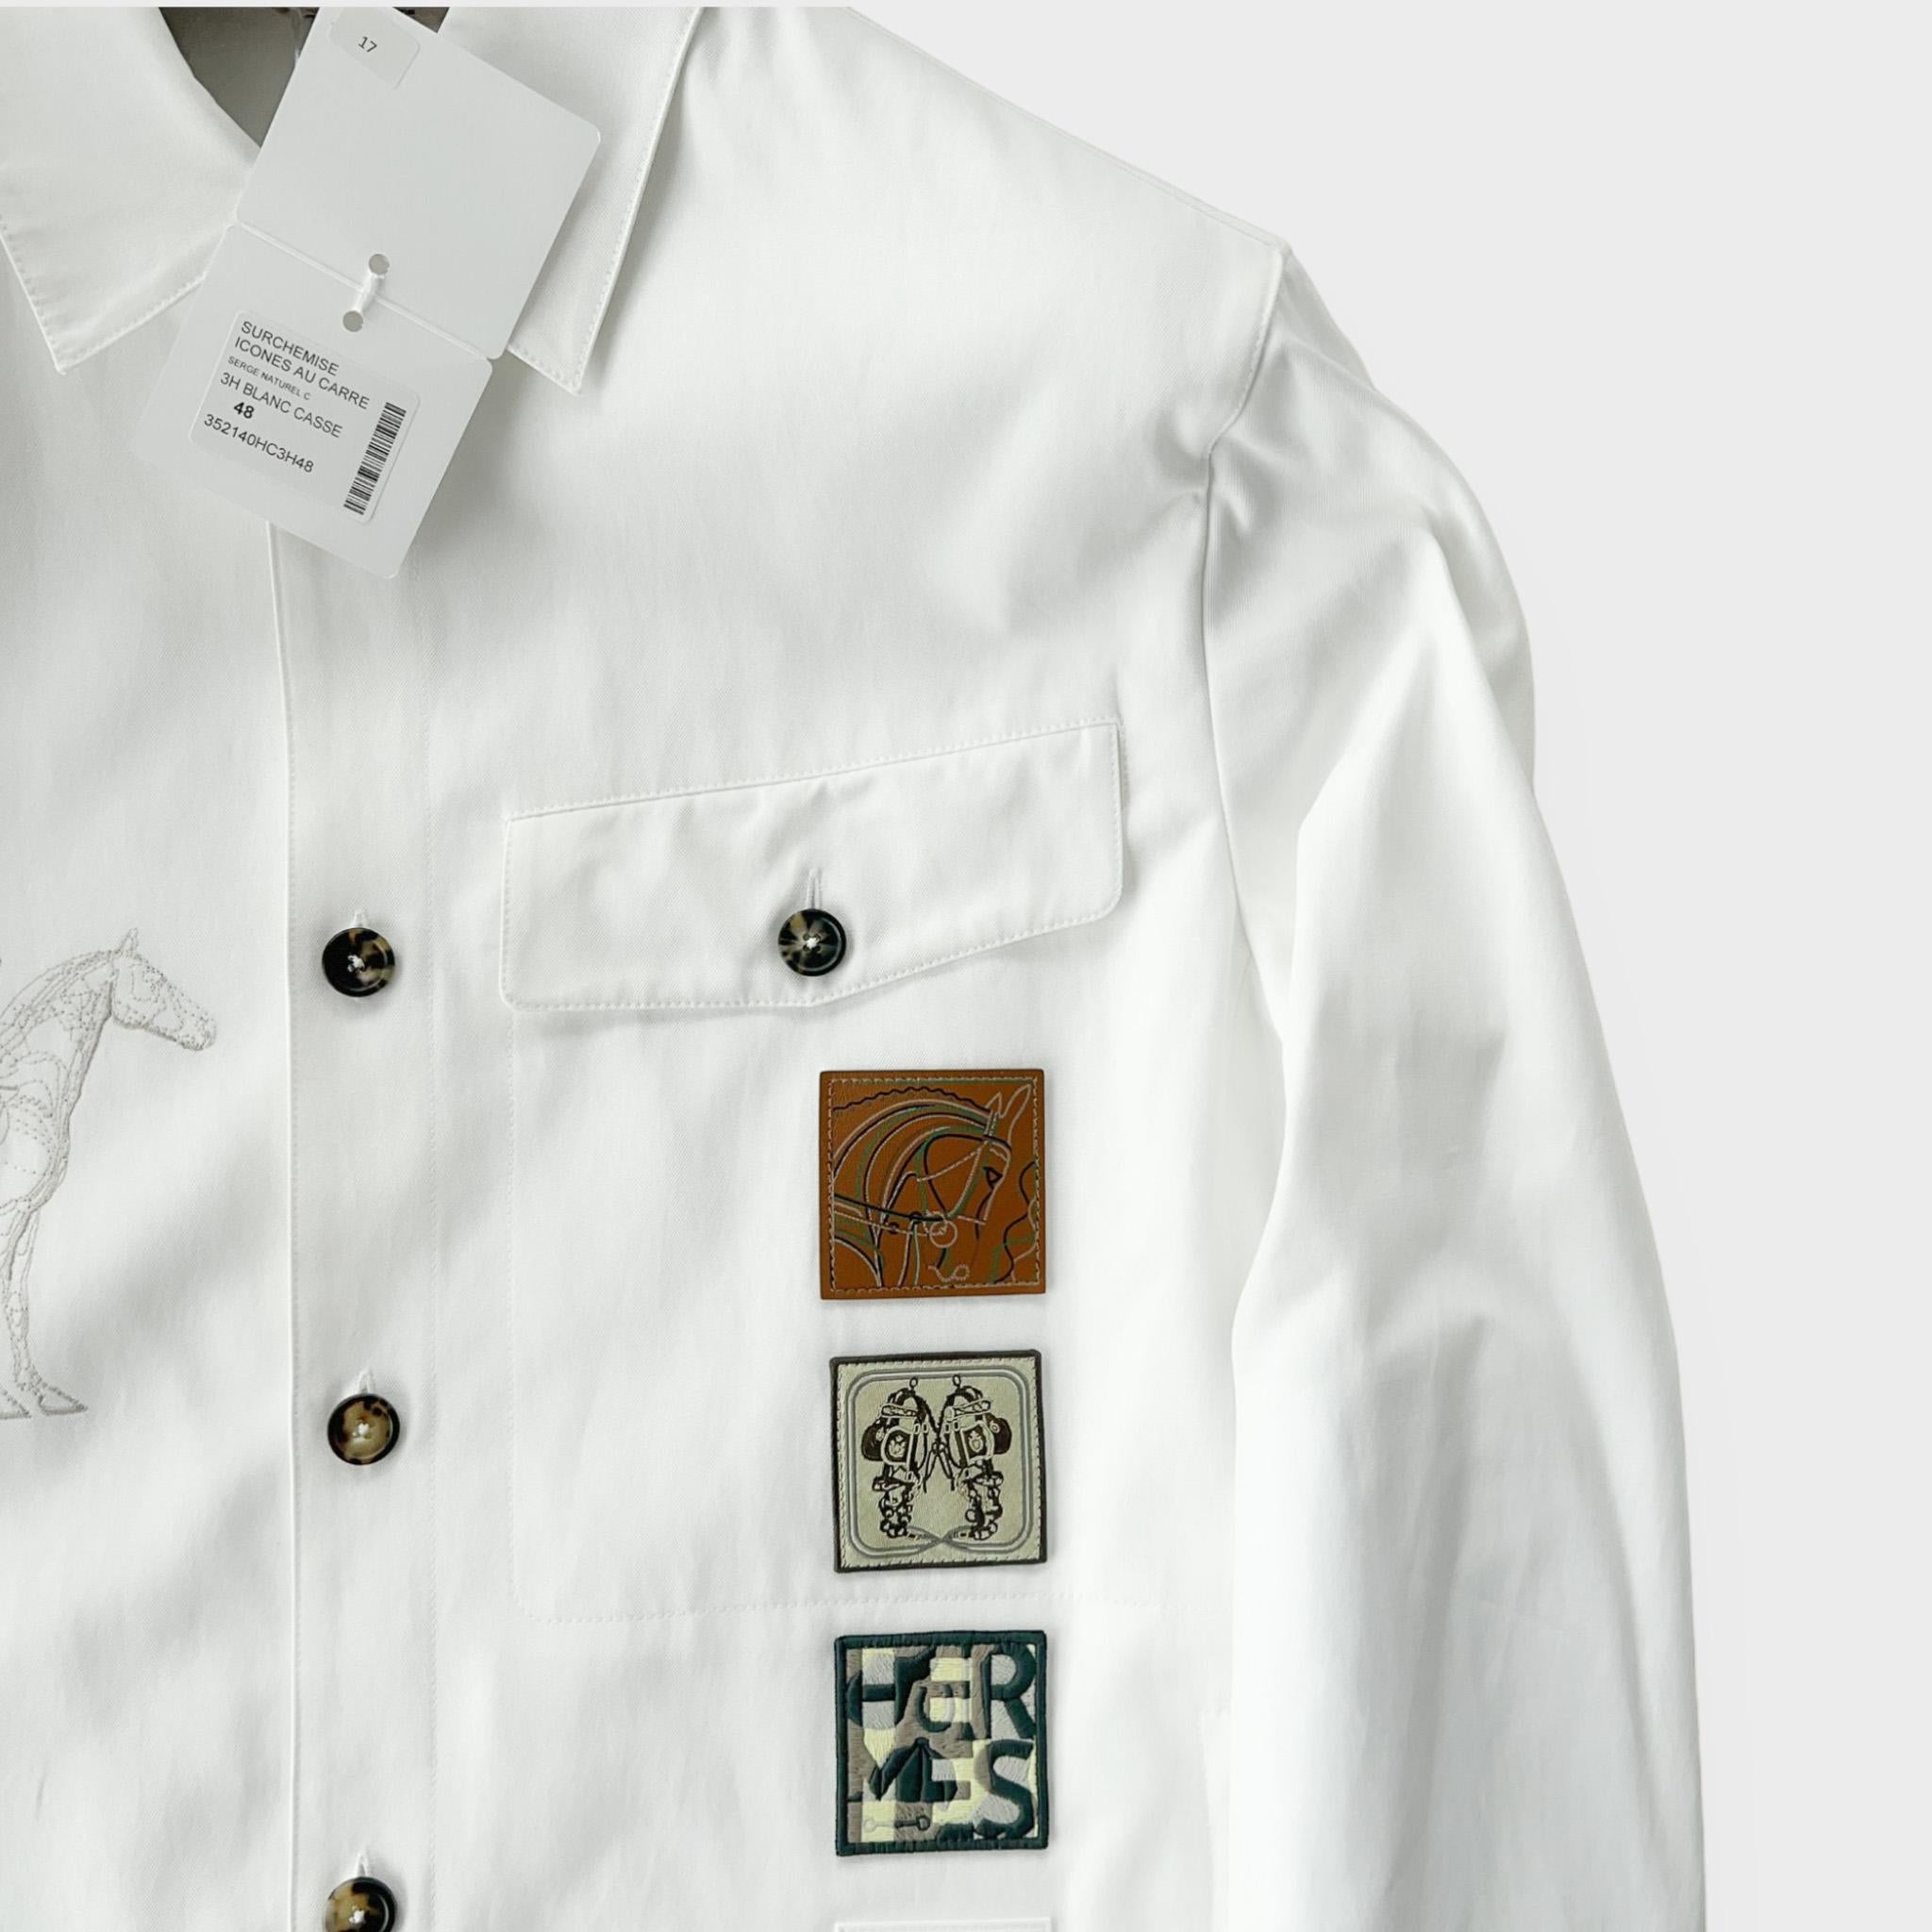 Shop this Men's 'Icones au Carre' Straight Cut Overshirt from the Hermes Spring / Summer 2023 collection. It comes in the Blanc Cassé colour way and features the new season 'Icones au Carre' detailing.

The jacket is made from 54% Viscose and 46%